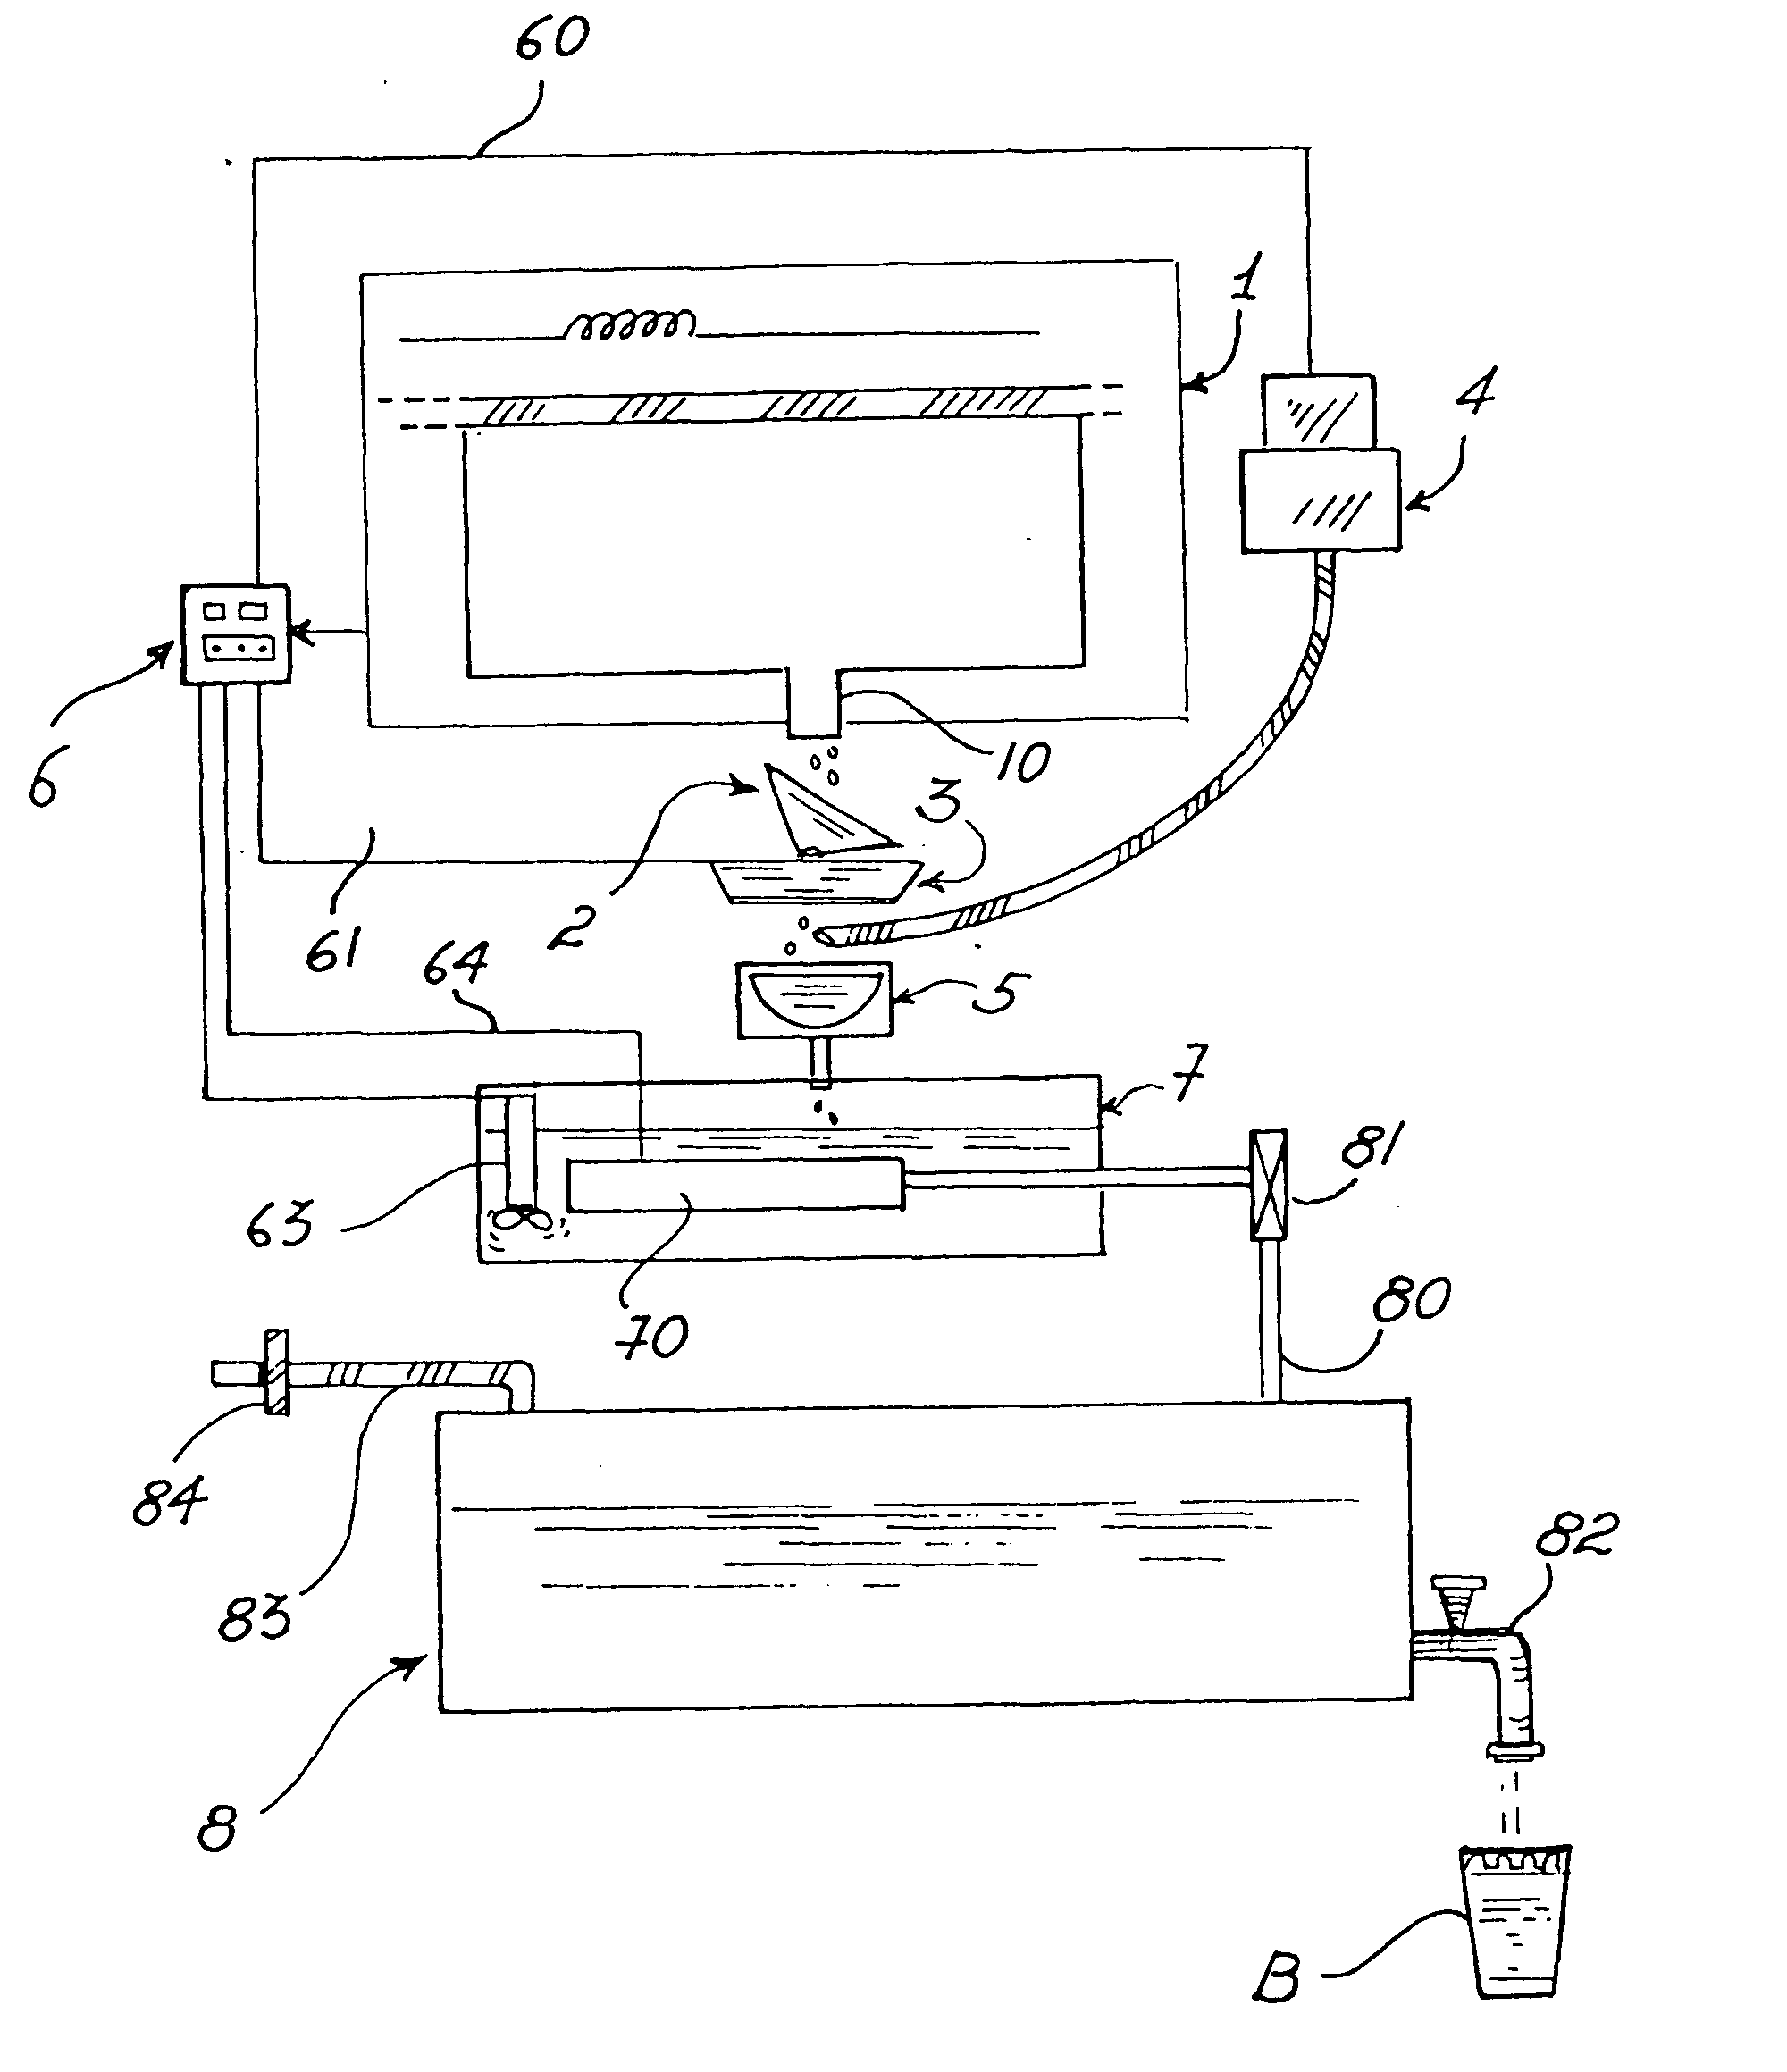 Device for conditioning water produced by air conditioning or environmental dehumidification apparatuses or plants